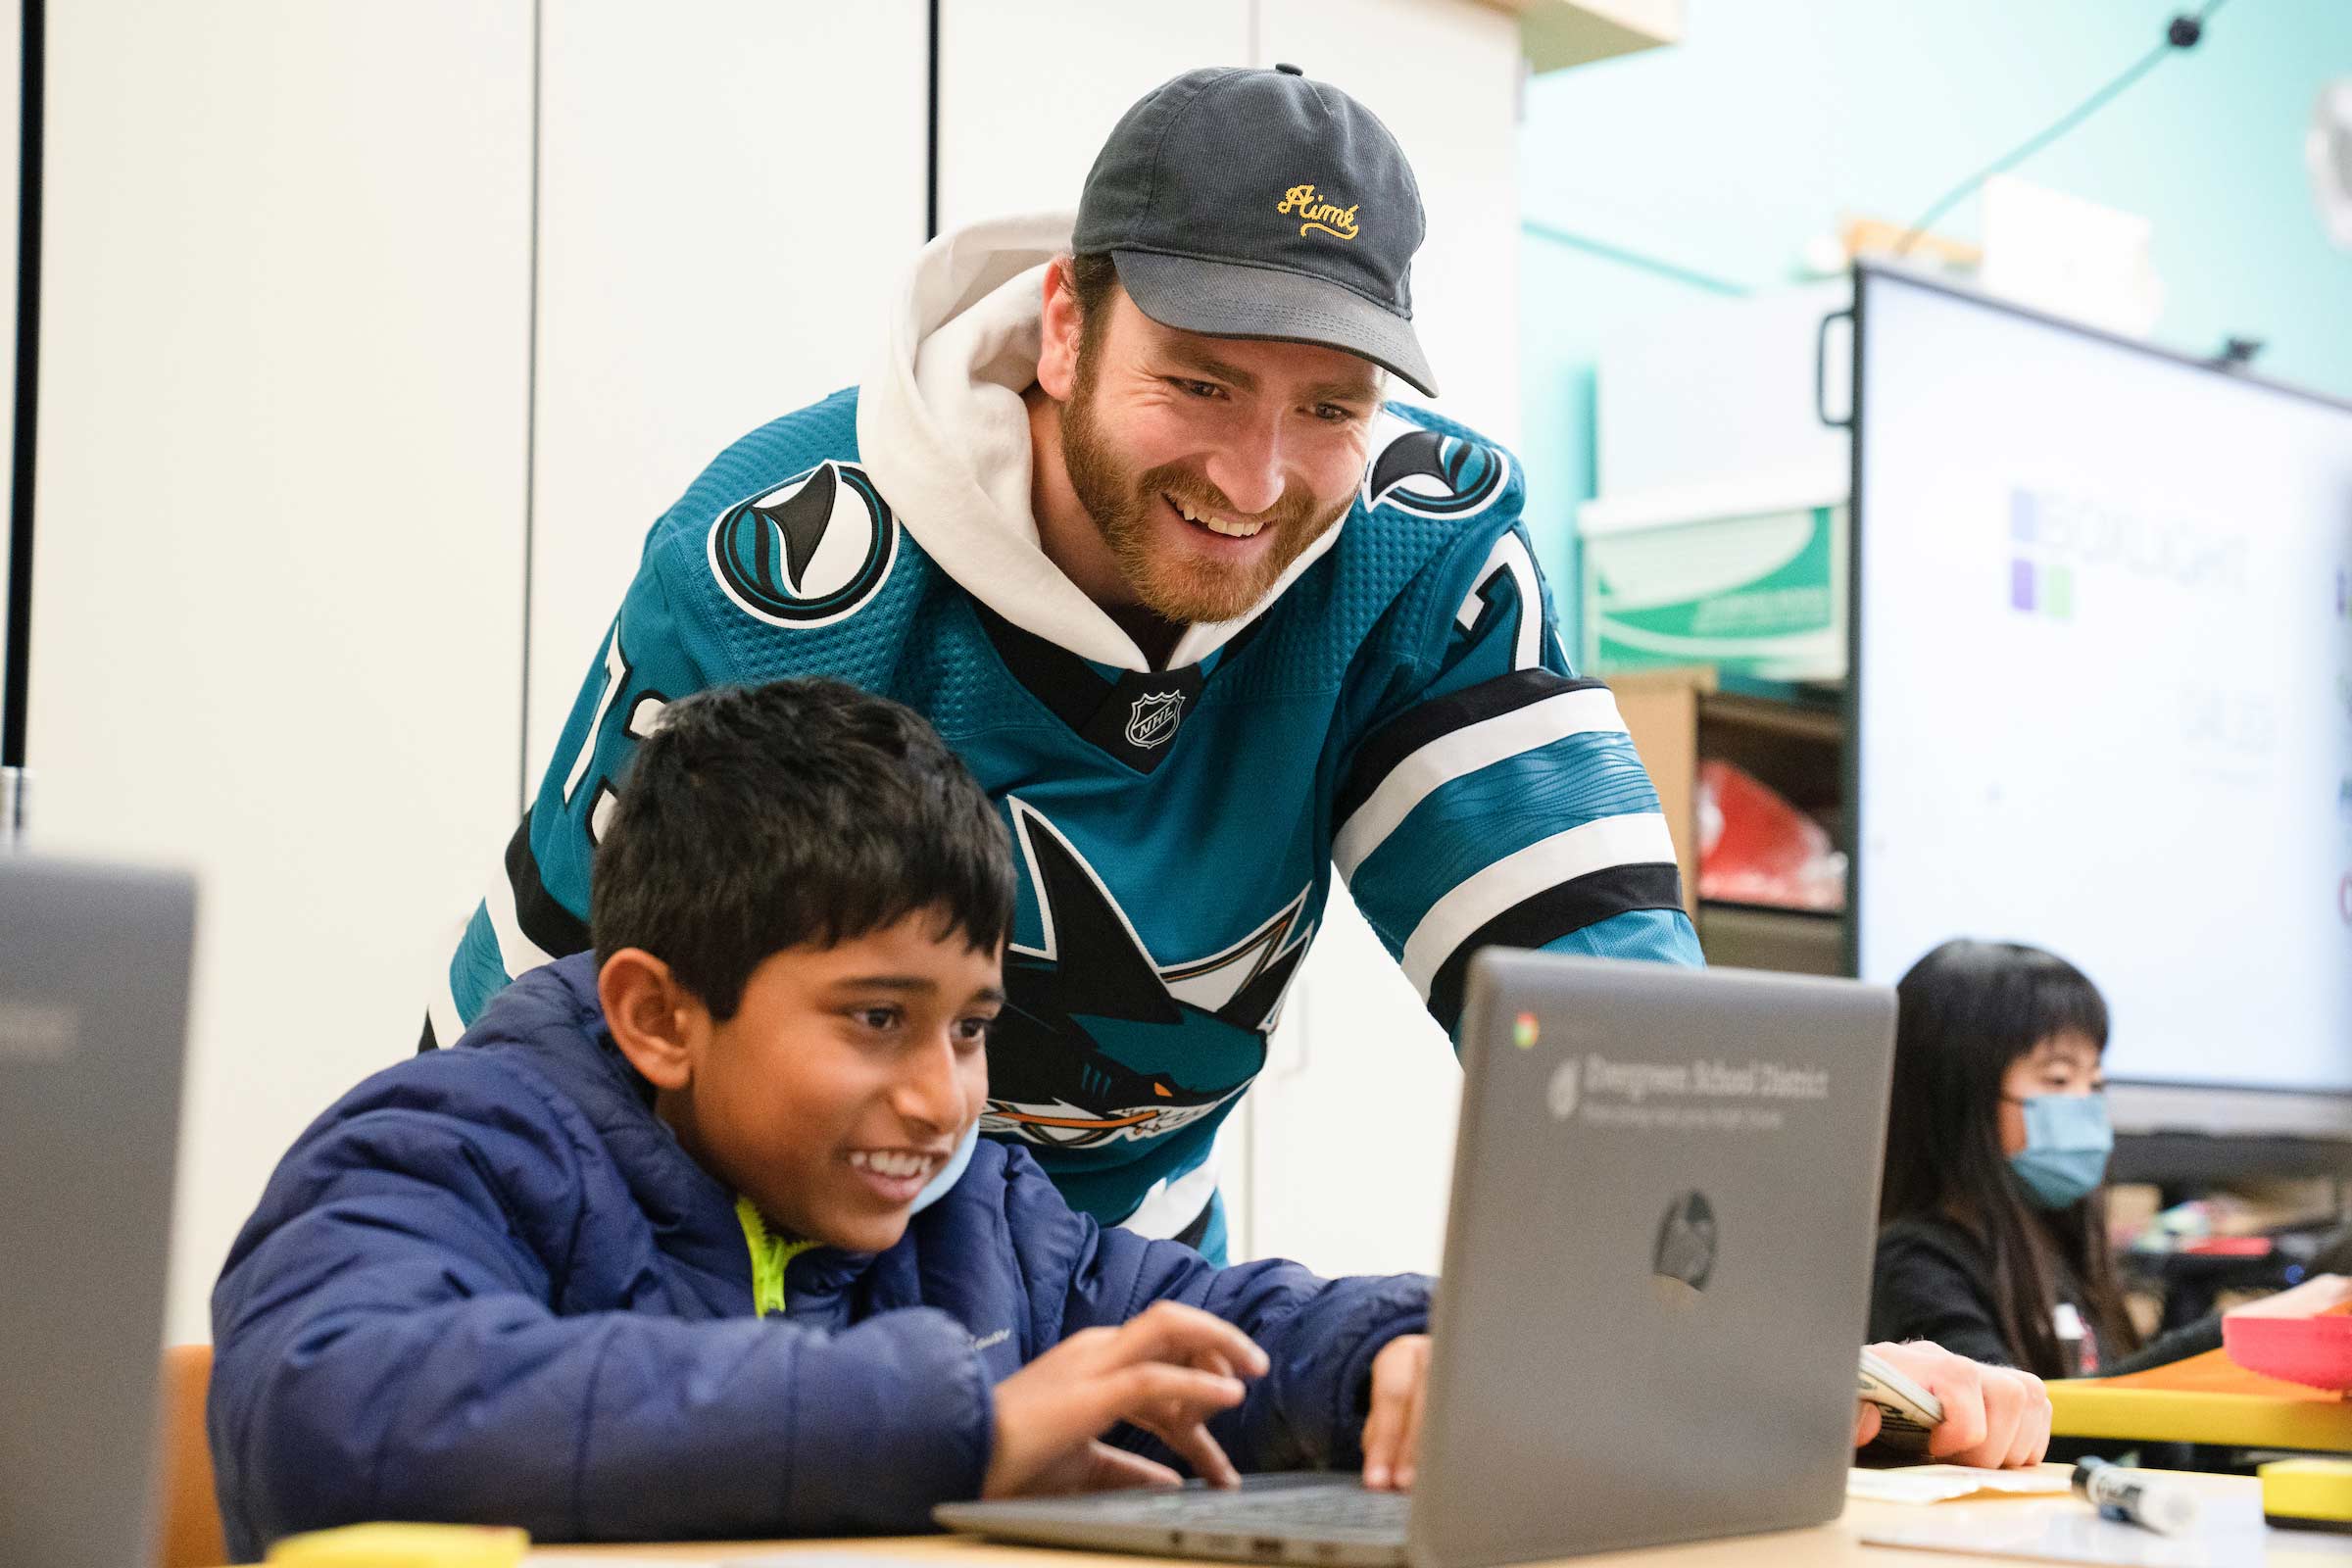 A Shark player in his teal jersey looking over the shoulder of a teenager while he's working on a laptop computer in a classroom.